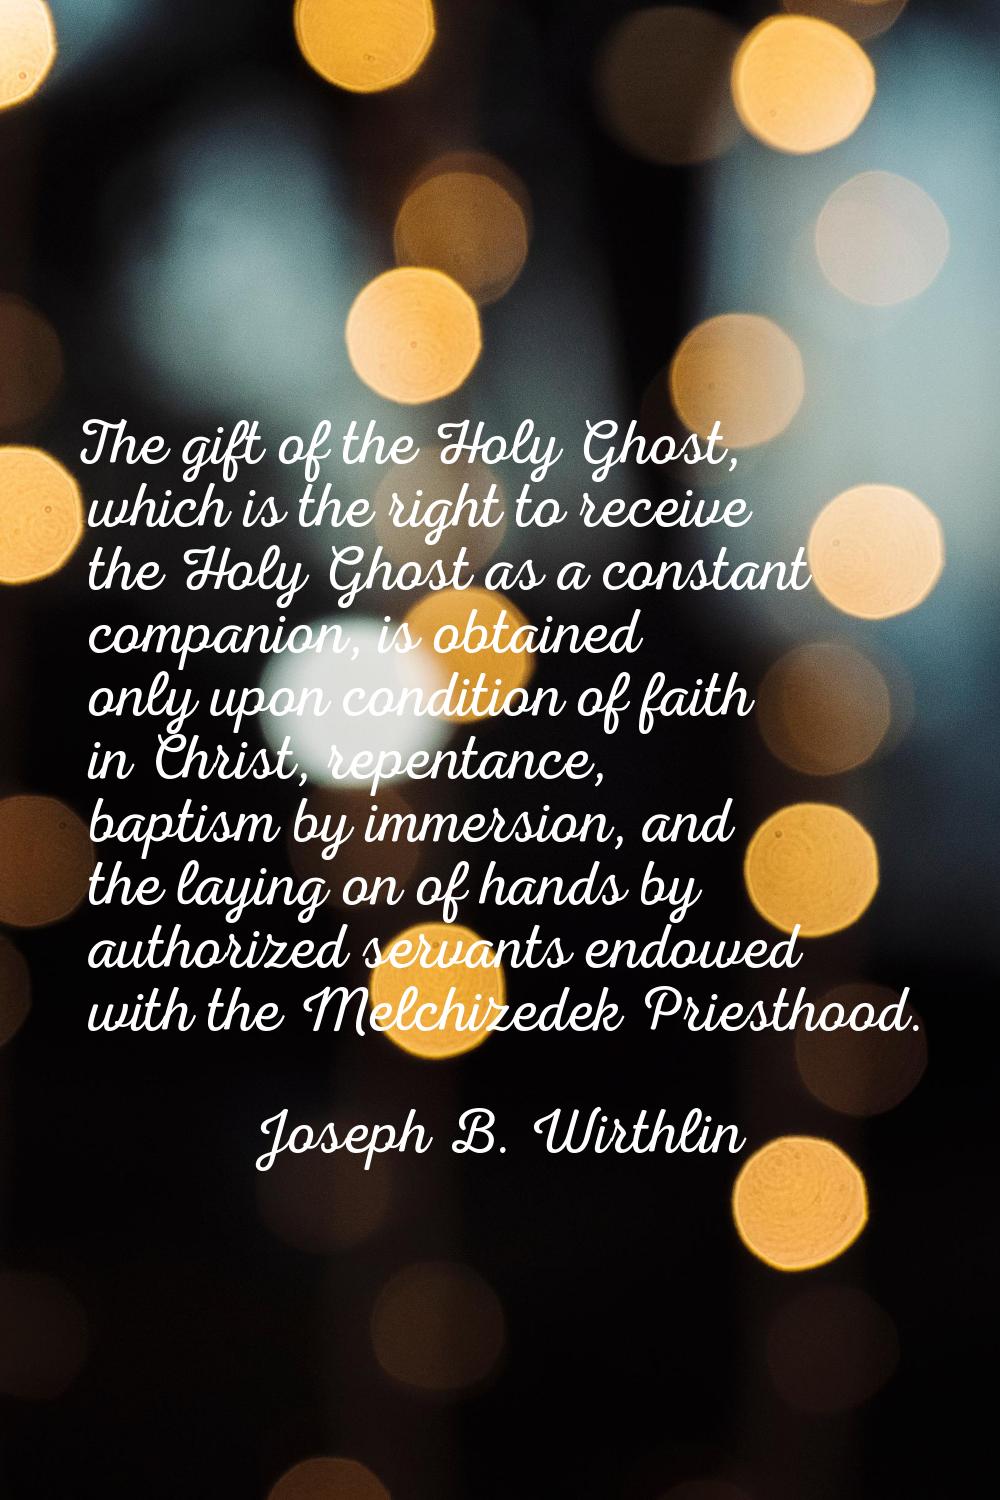 The gift of the Holy Ghost, which is the right to receive the Holy Ghost as a constant companion, i